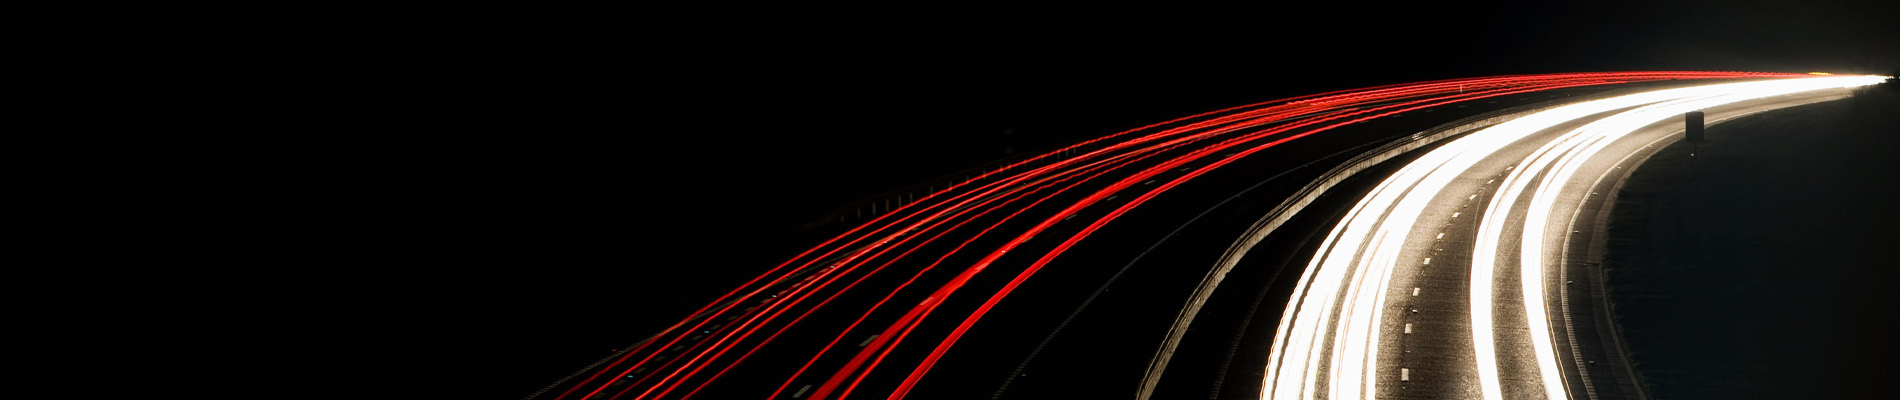 Vehicles driving on a road in the dark